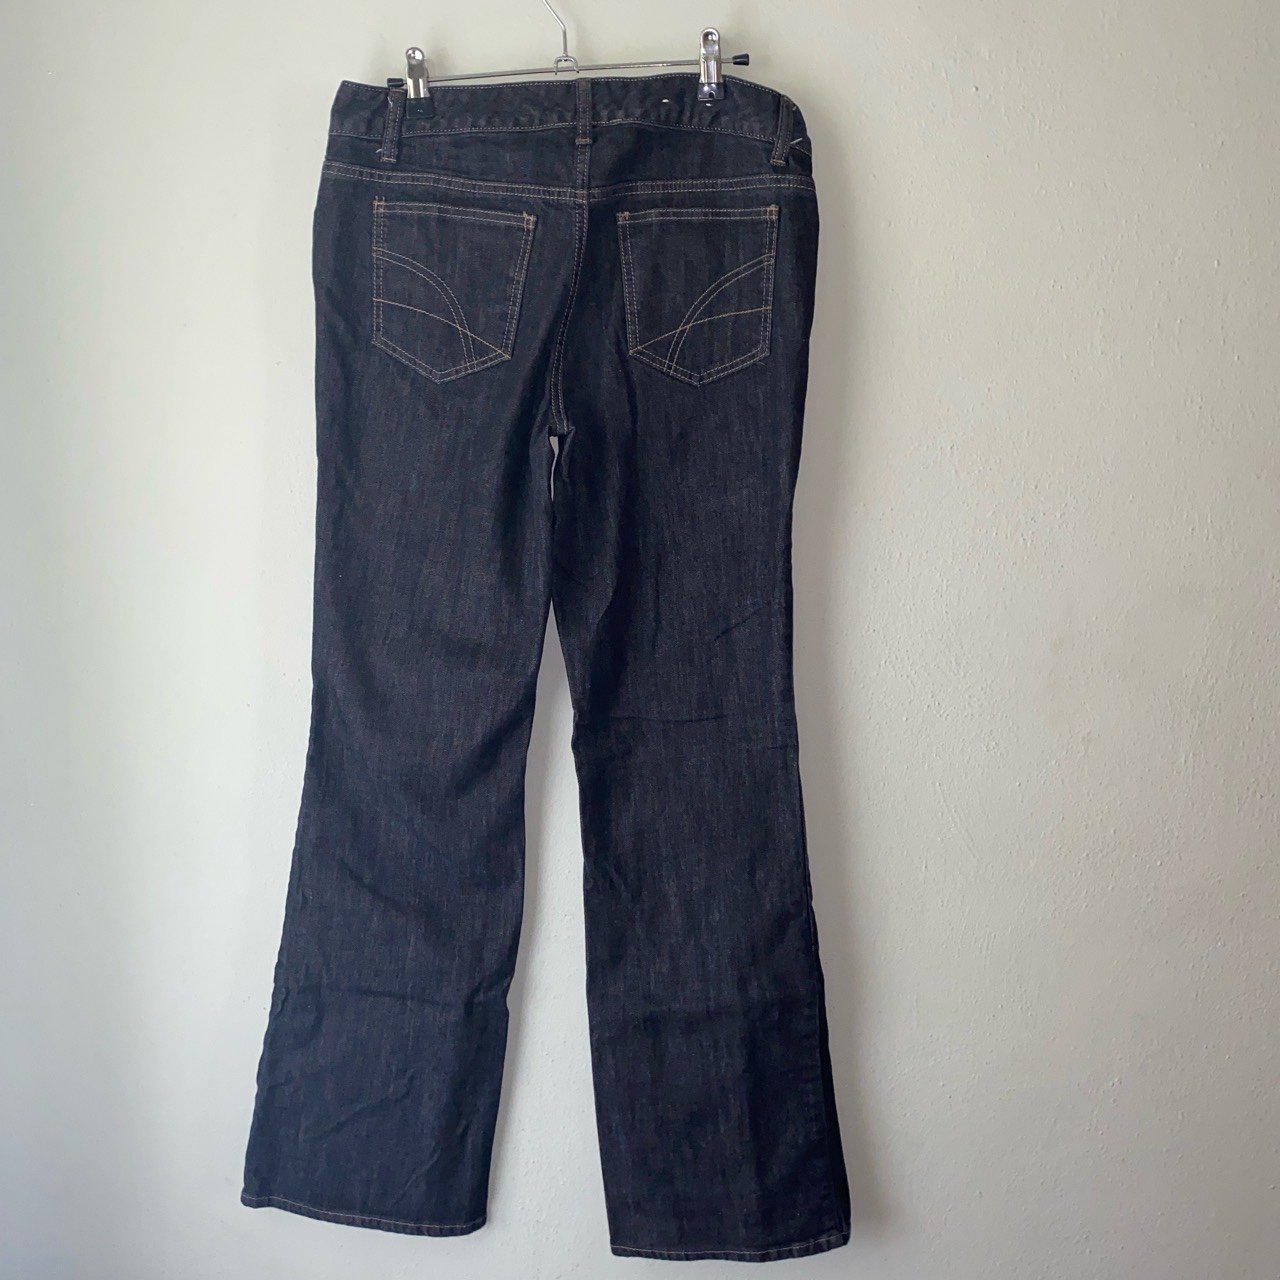 High quality Tommy Hilfiger Jeans Boot Cut Black Denim Ifocwmbd2 Outlet Store